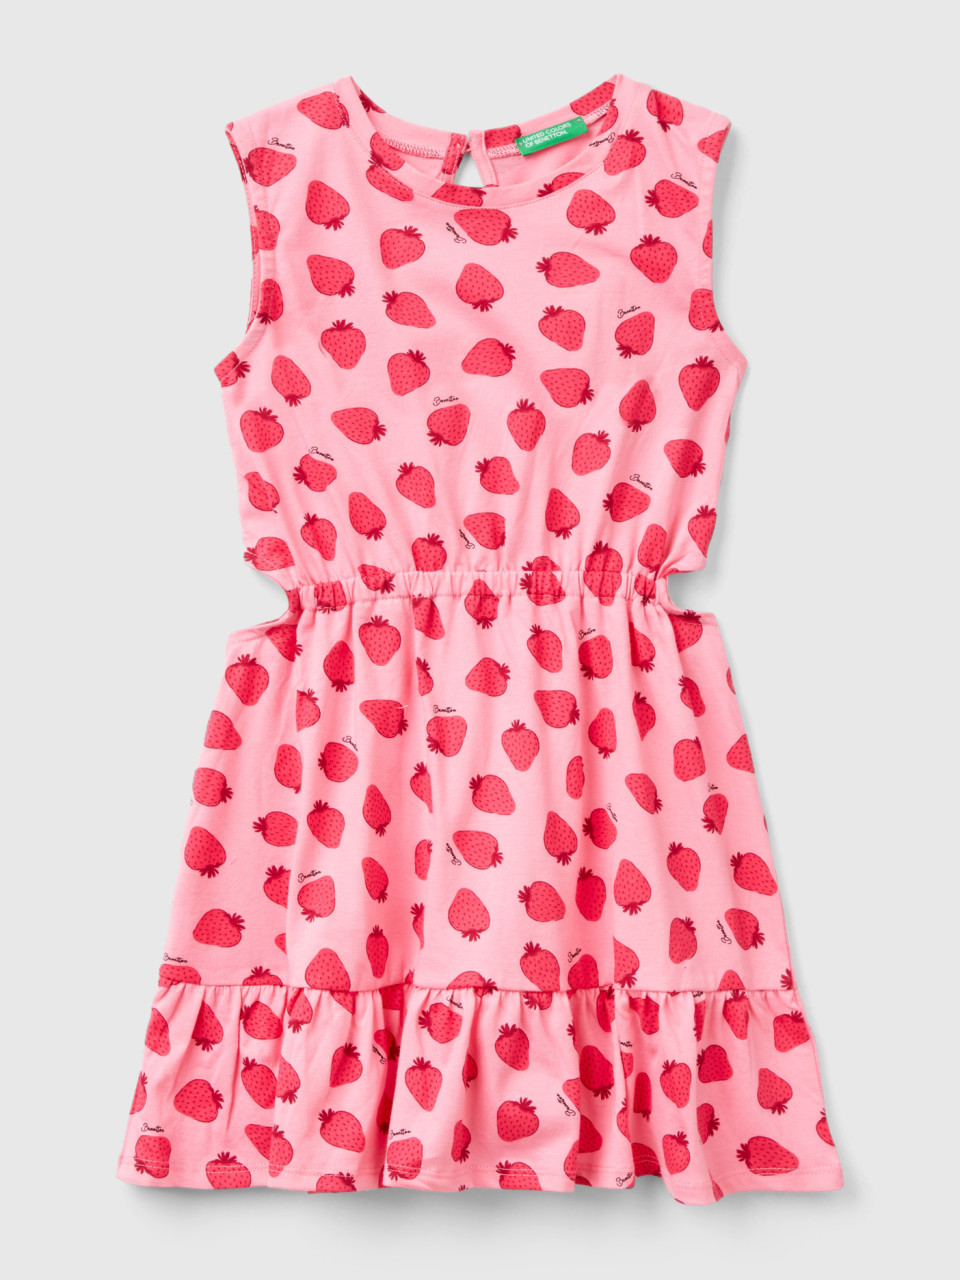 Benetton, Pink Dress With Strawberry Print, Pink, Kids